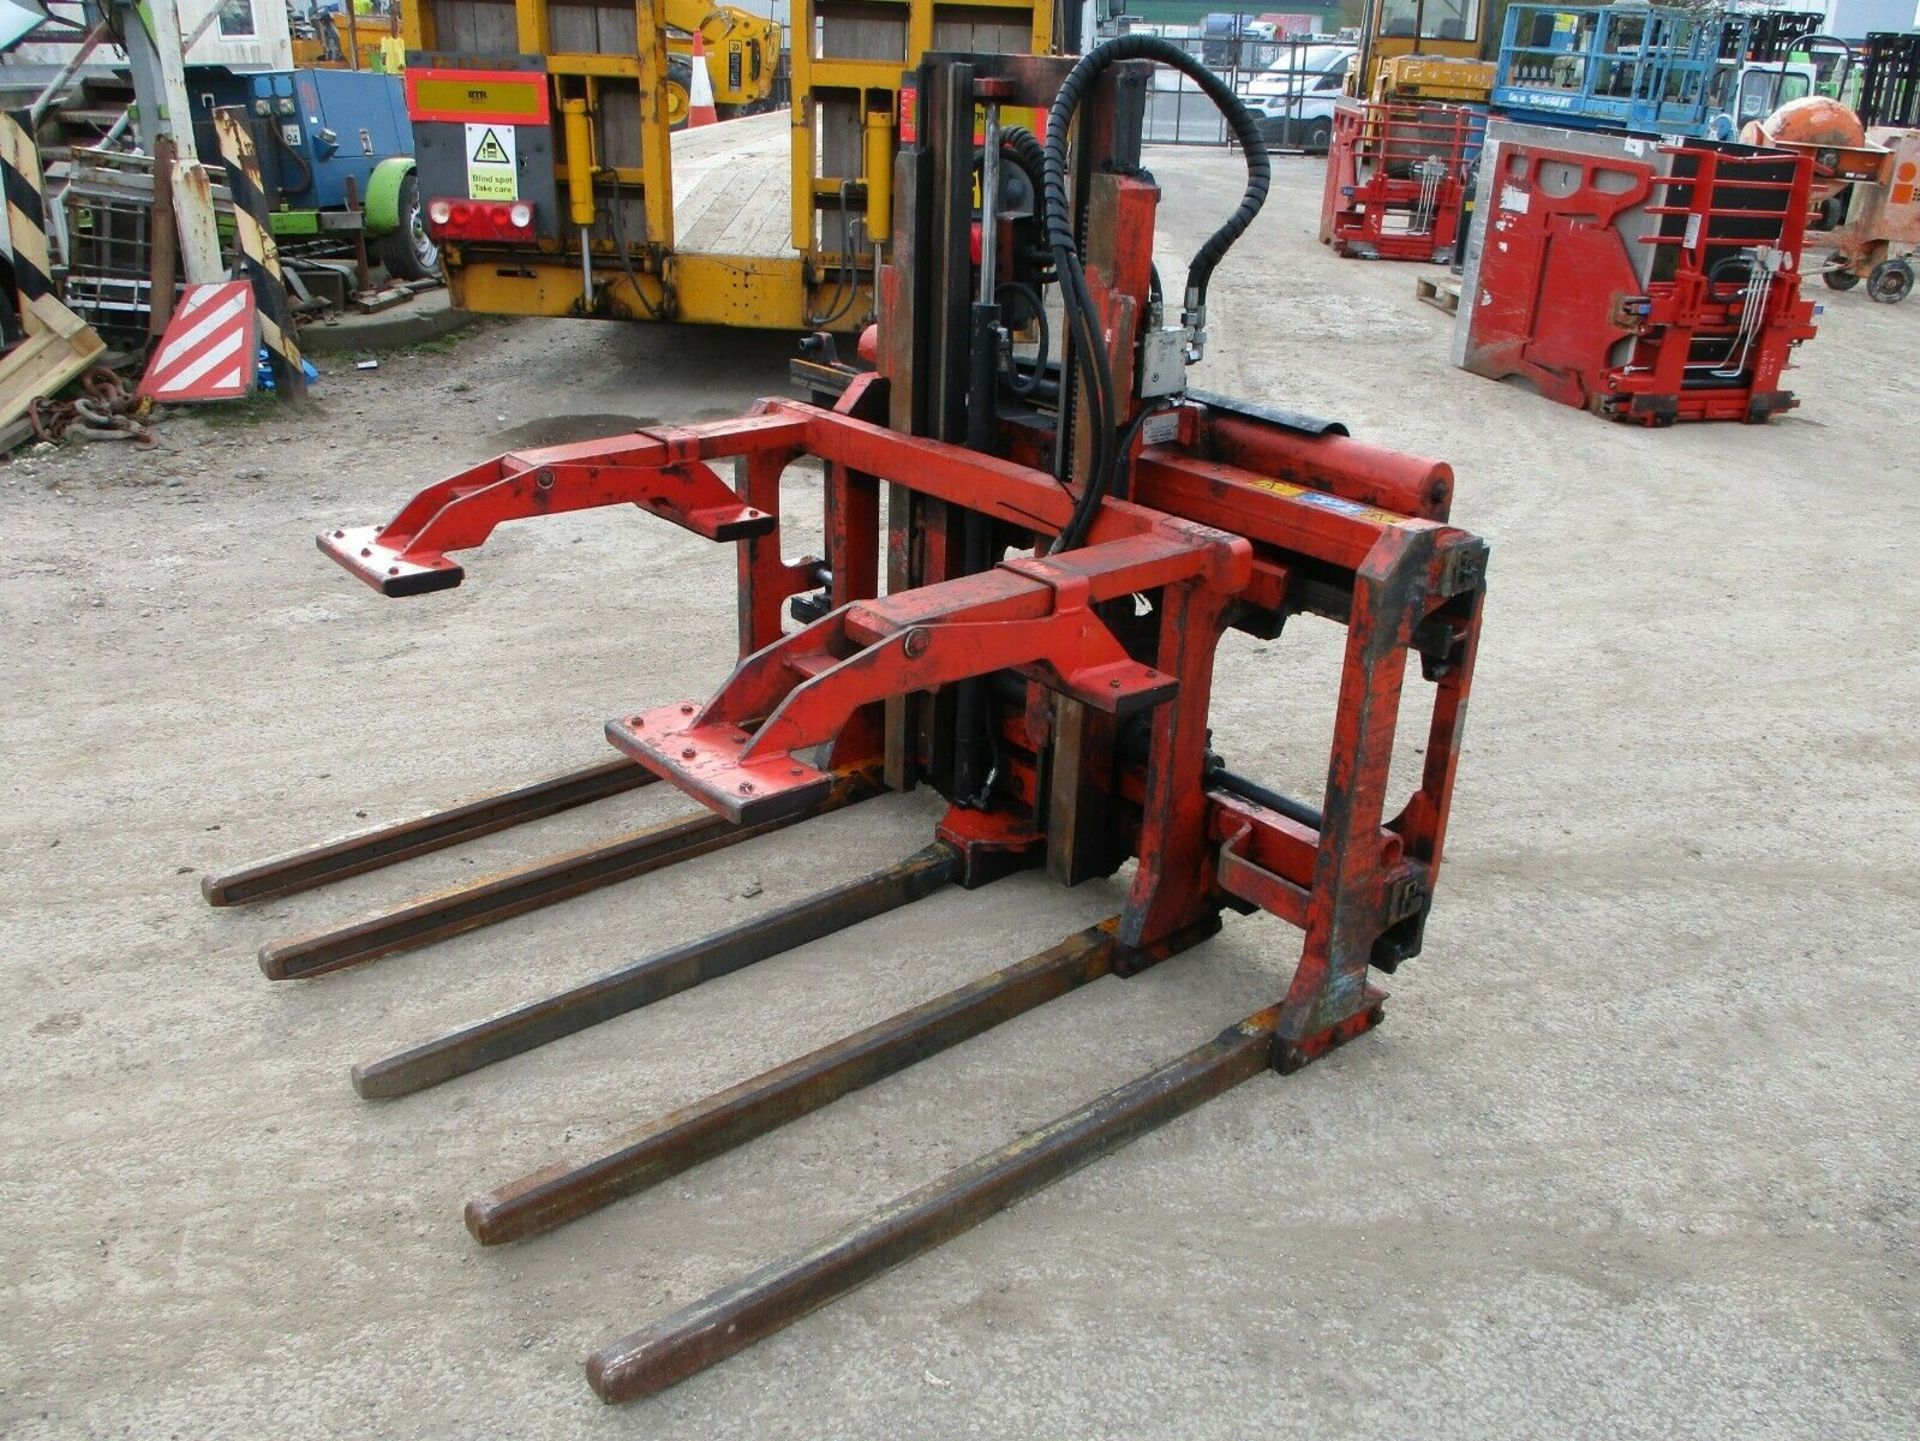 Kaup multi pallet lifter - Image 4 of 6